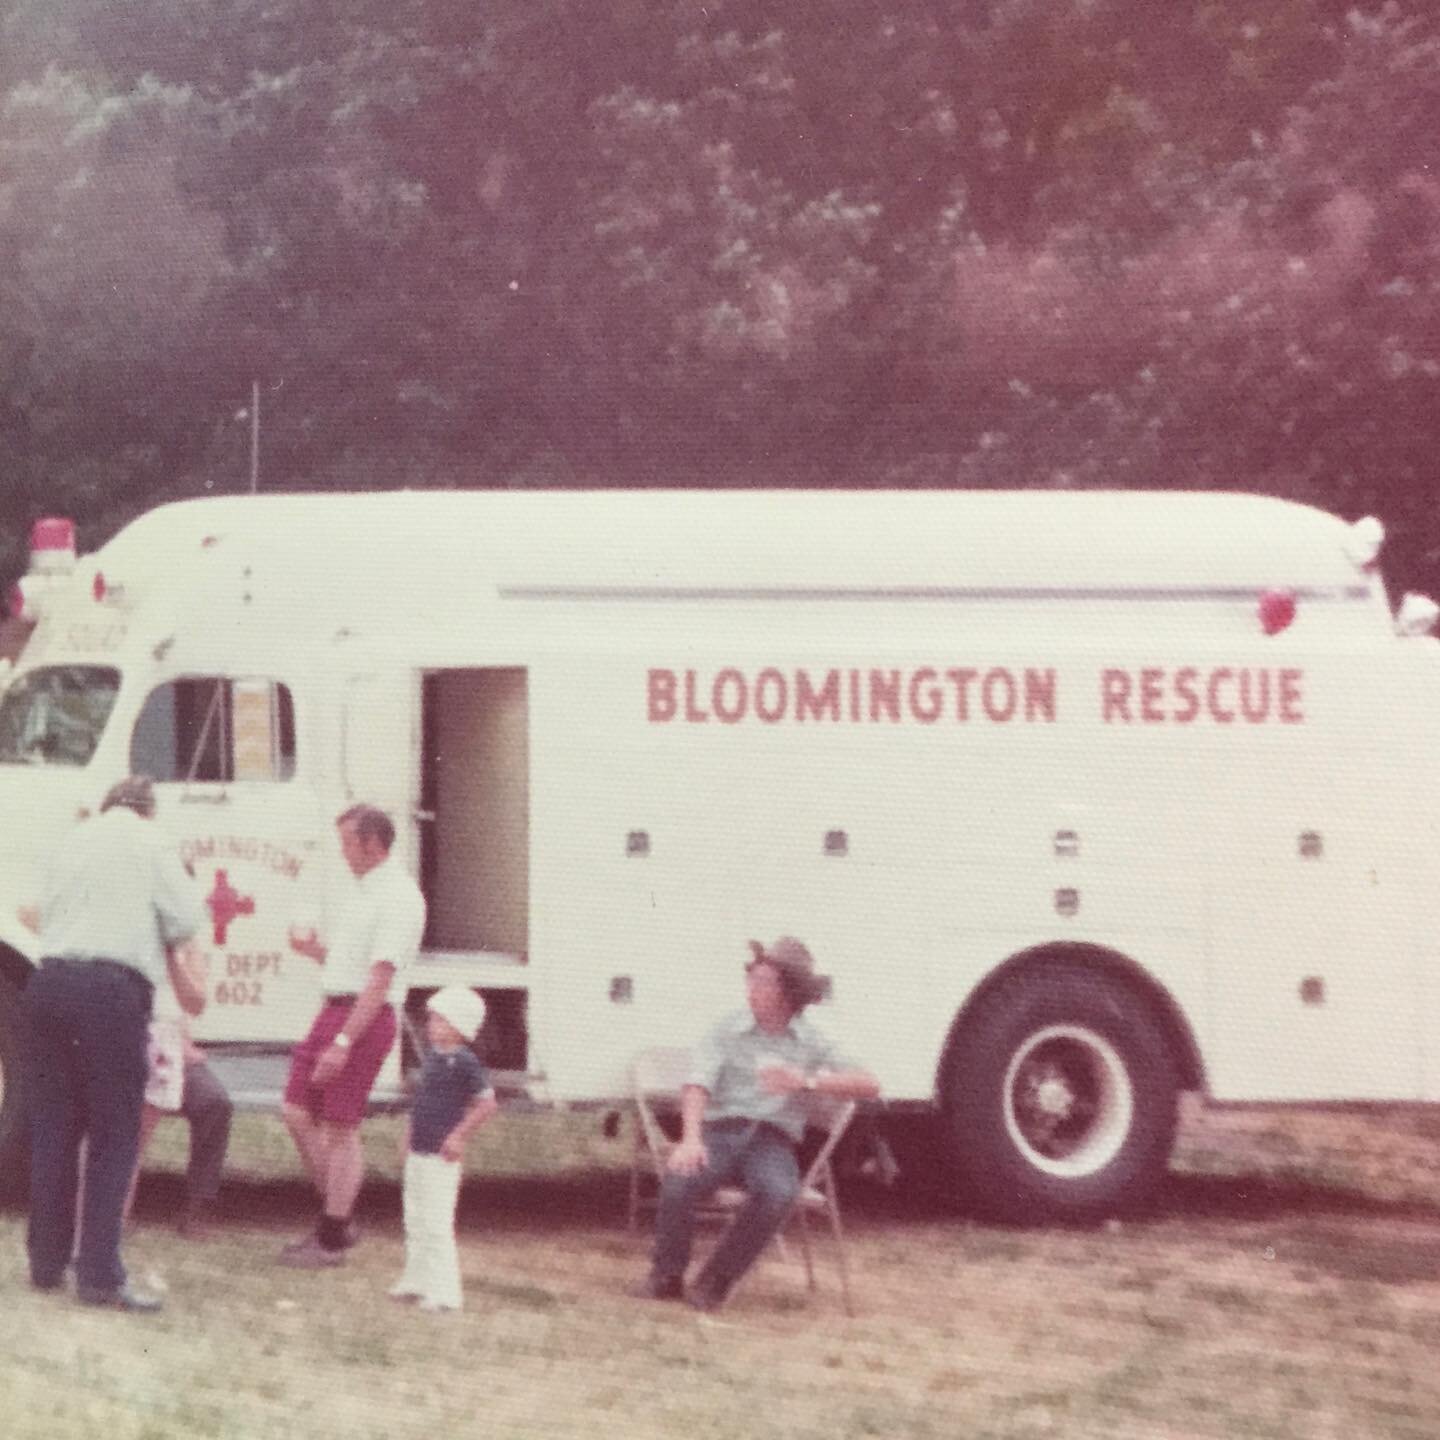 My family has a long track record of service to our community.  It began with my grandparents and my parents working for the Bloomington Rescue Squad (an all volunteer group of first responders). With a mother that went on to become a nurse, trained 